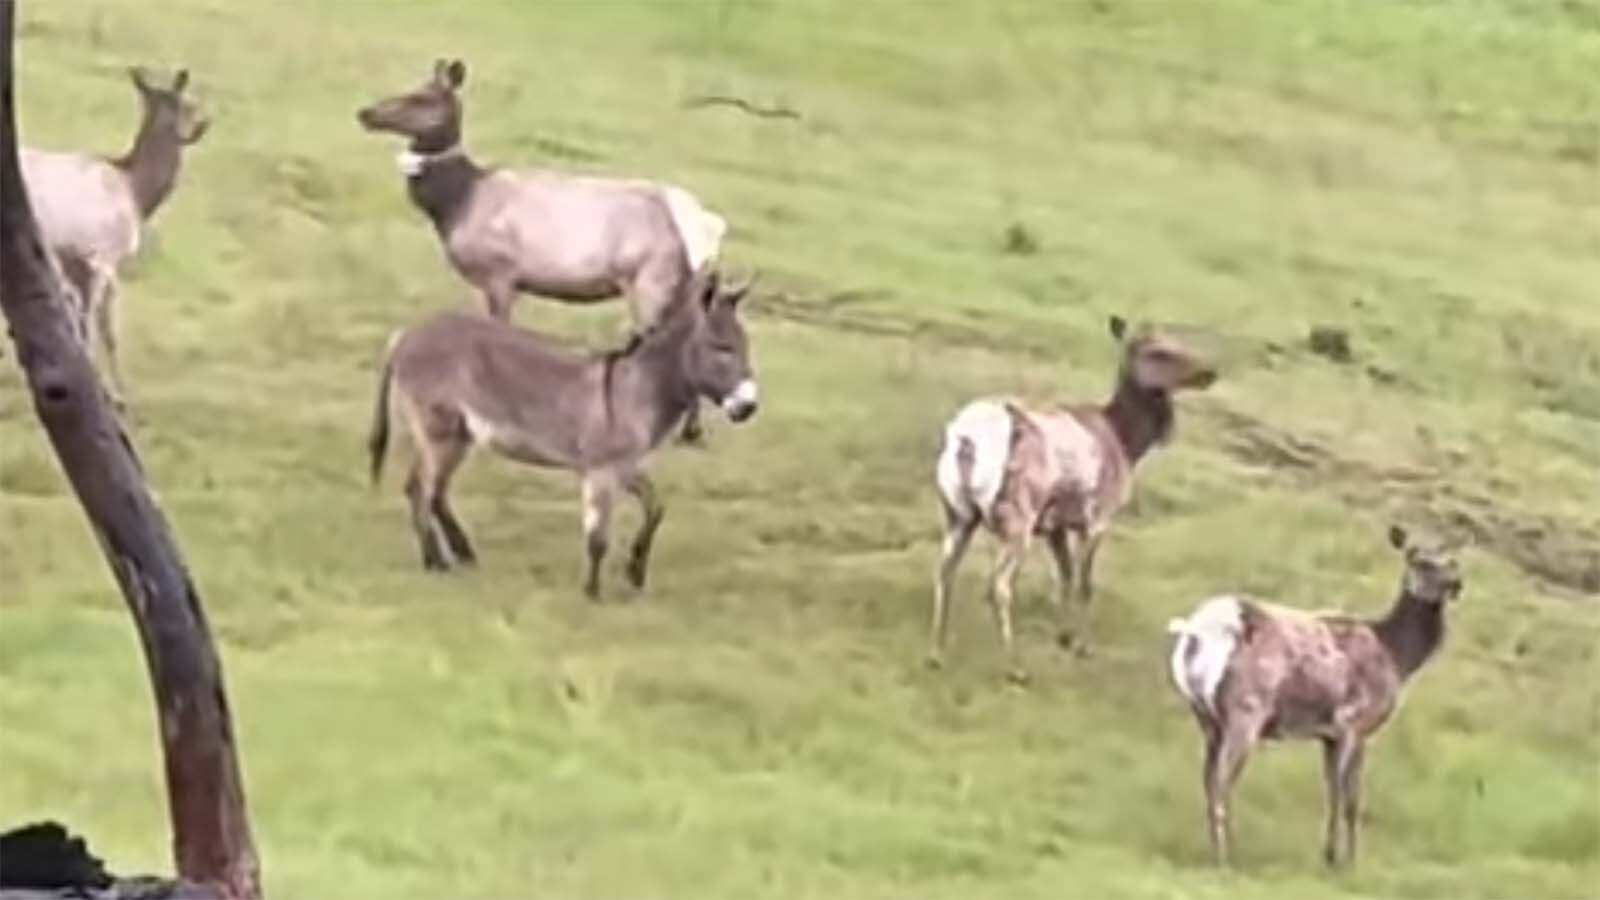 Diesel the donkey ran away from his home five years ago and turned up again this spring when a hunter captured this video of him living with a herd of elk in California. Despite numerous online rumors, Diesel isn't from Wyoming and was never in the Cowboy State.